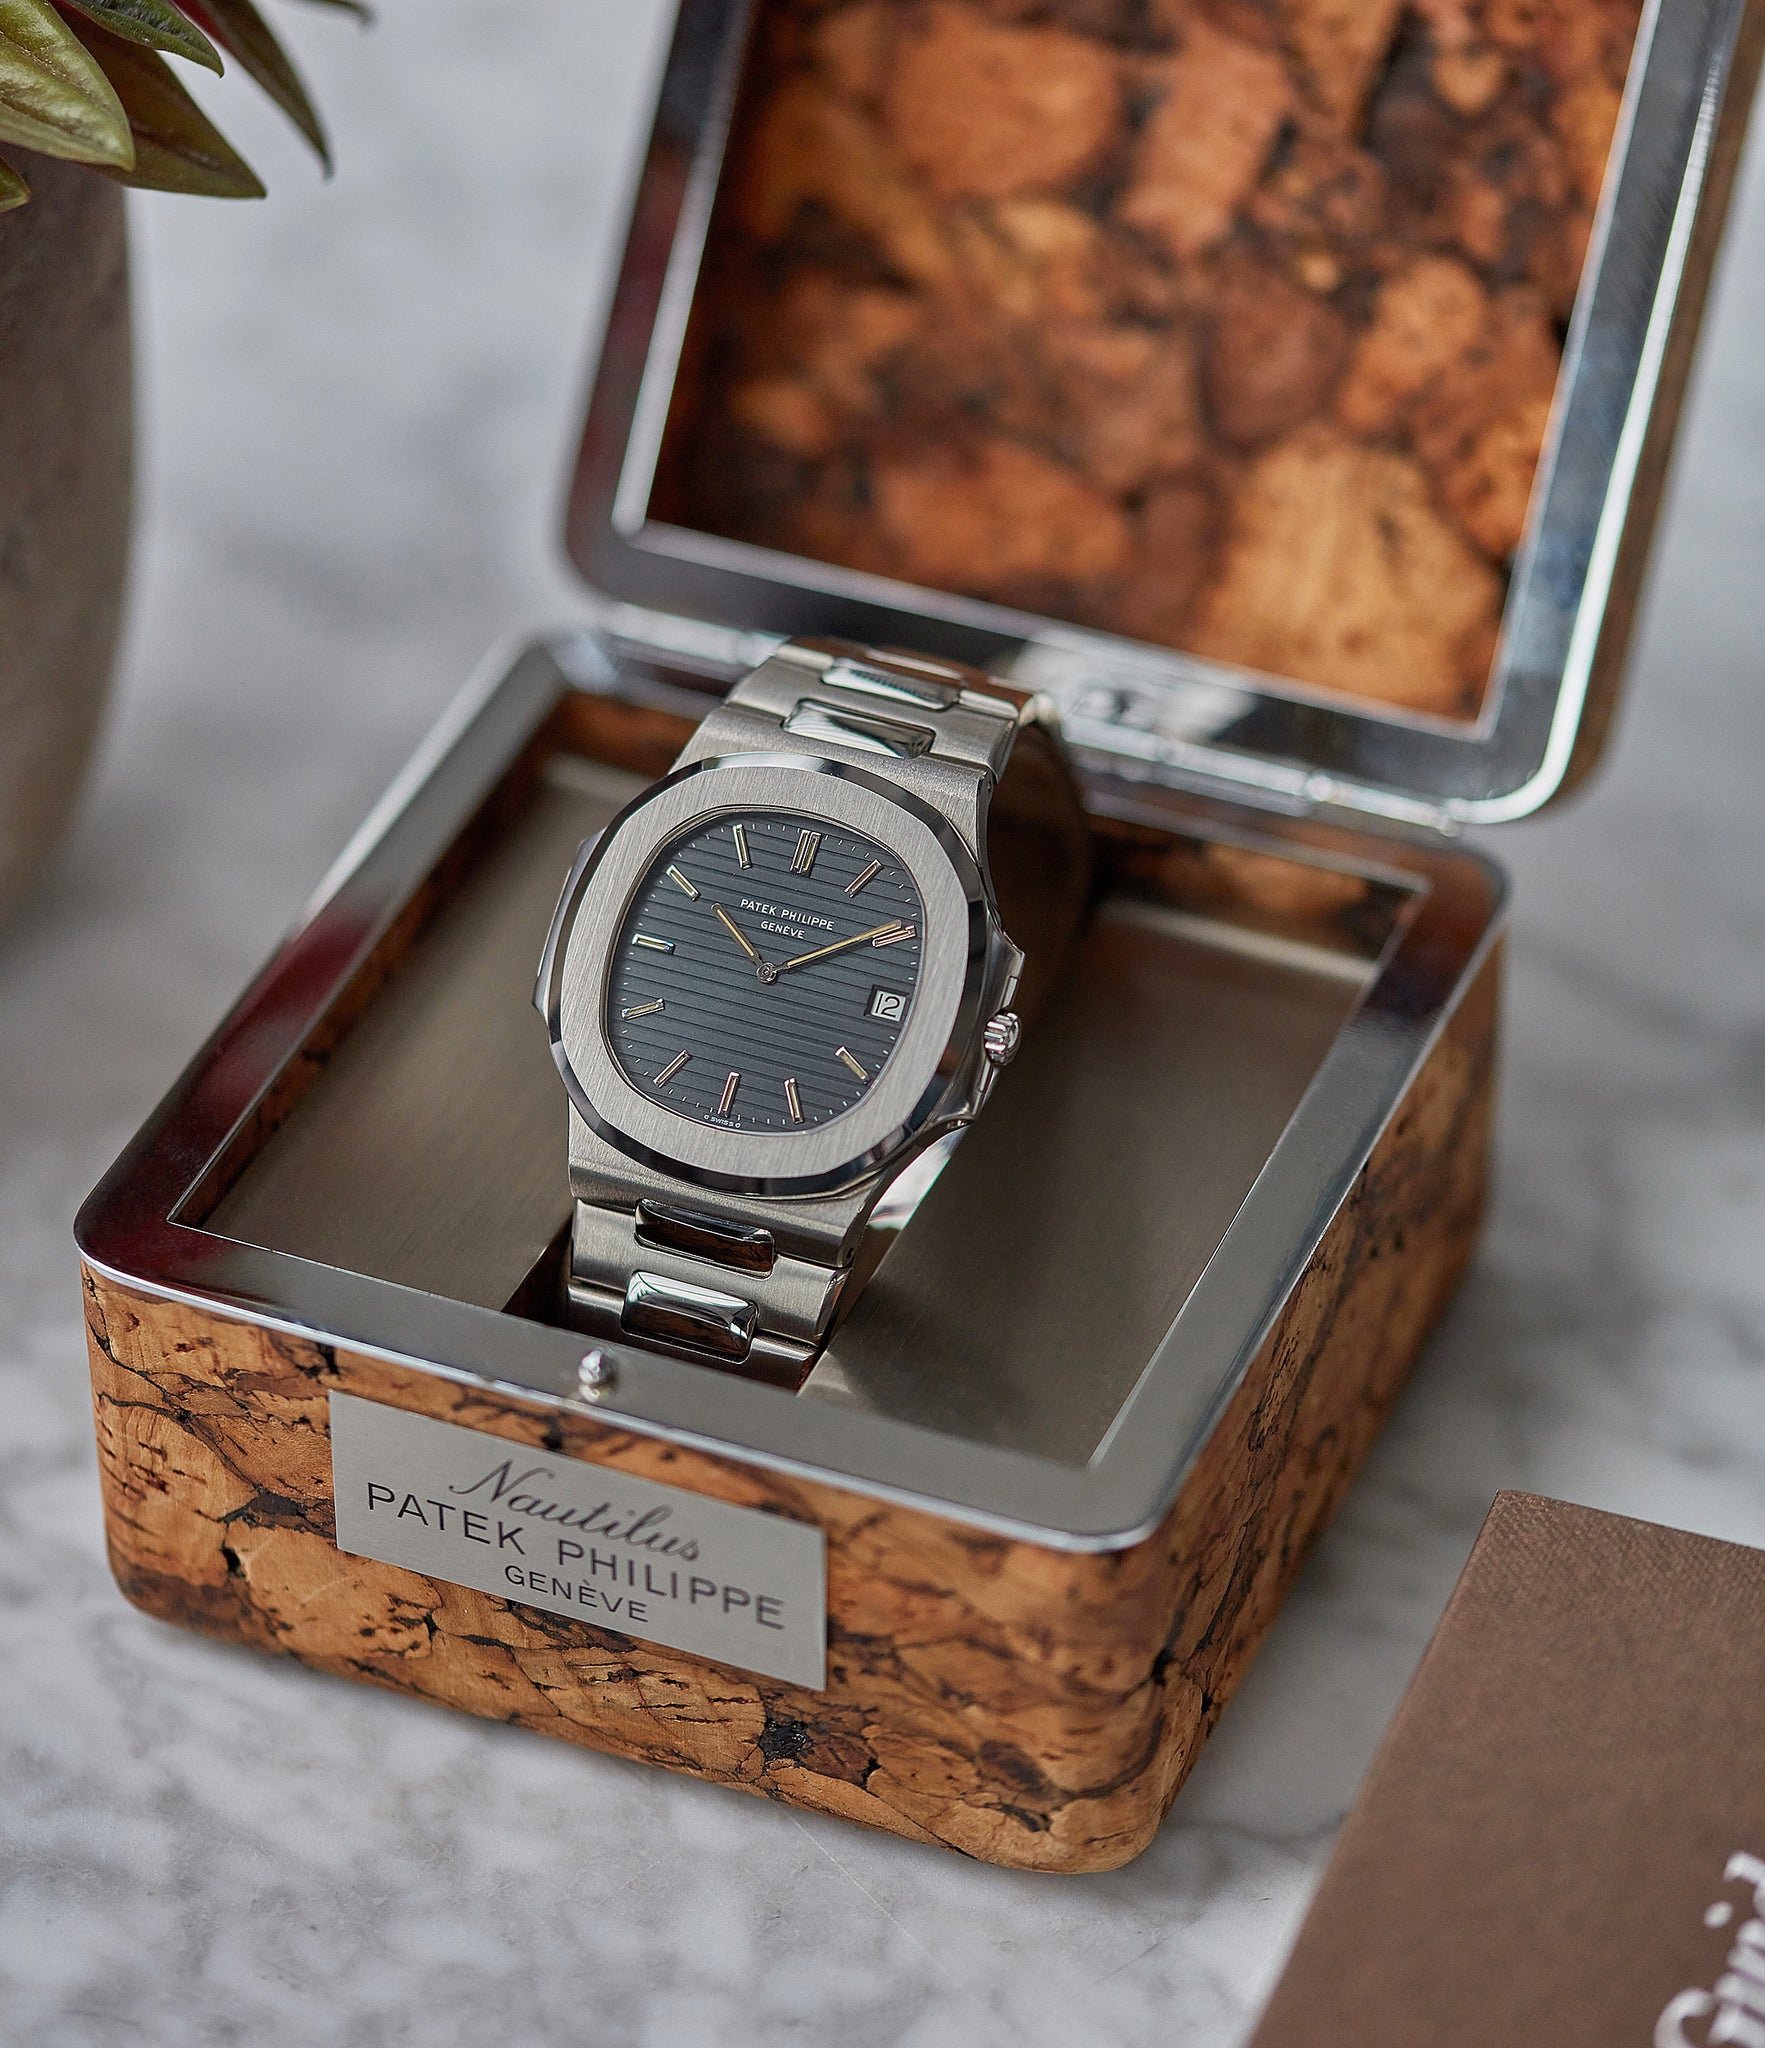 Patek Philippe cork box Nautilus 3700/001 full set sport watch for sale online at A Collected Man London UK specialist of rare watches